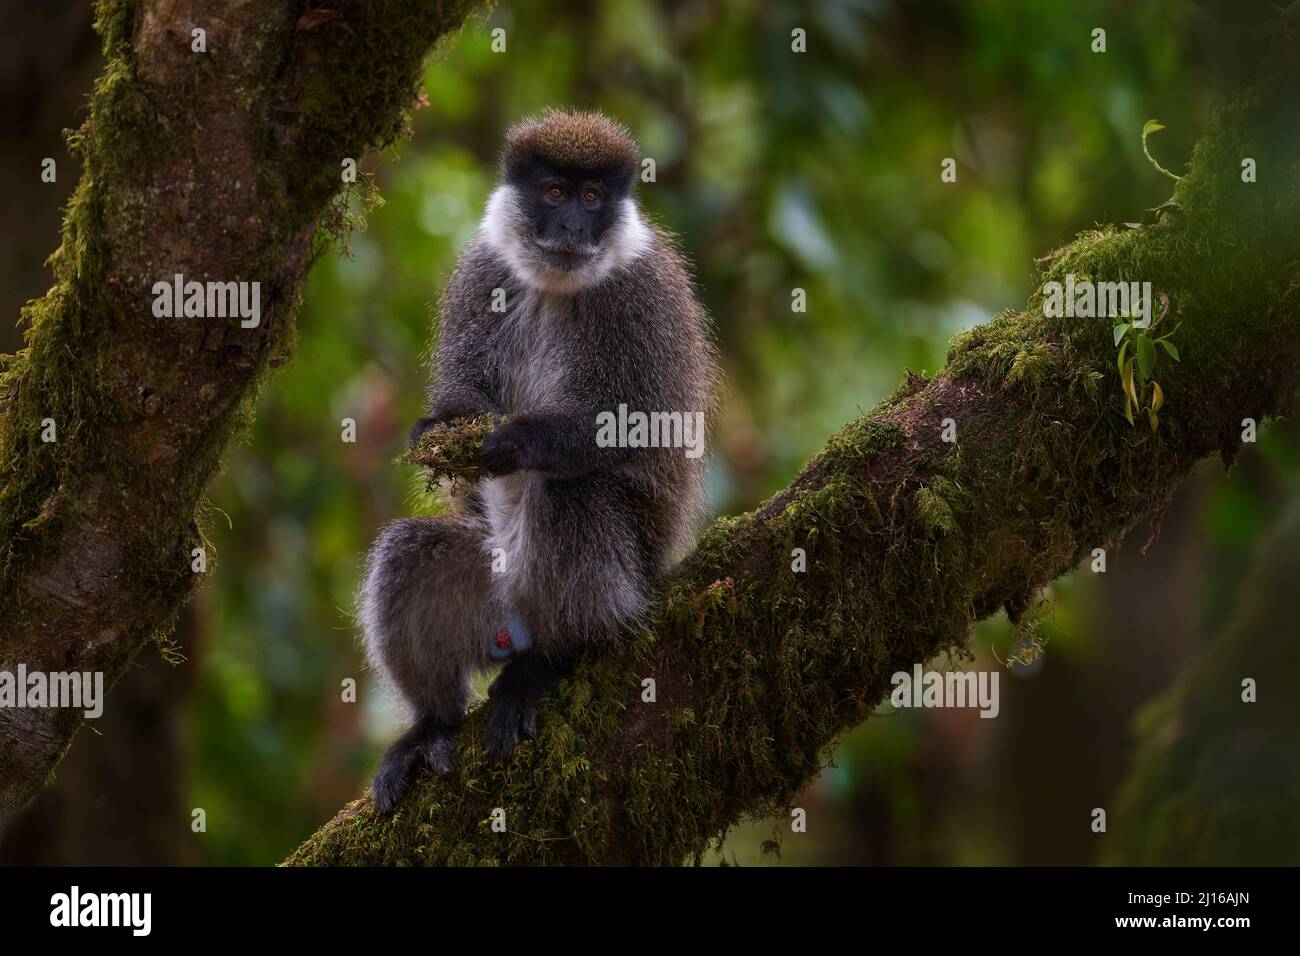 Bale vervet monkey, Chlorocebus djamdjamensis, with moss in the hands, Harenna Forest, Bale Mountains NP, in Ethiopia. Monkey animal from east Africa. Stock Photo